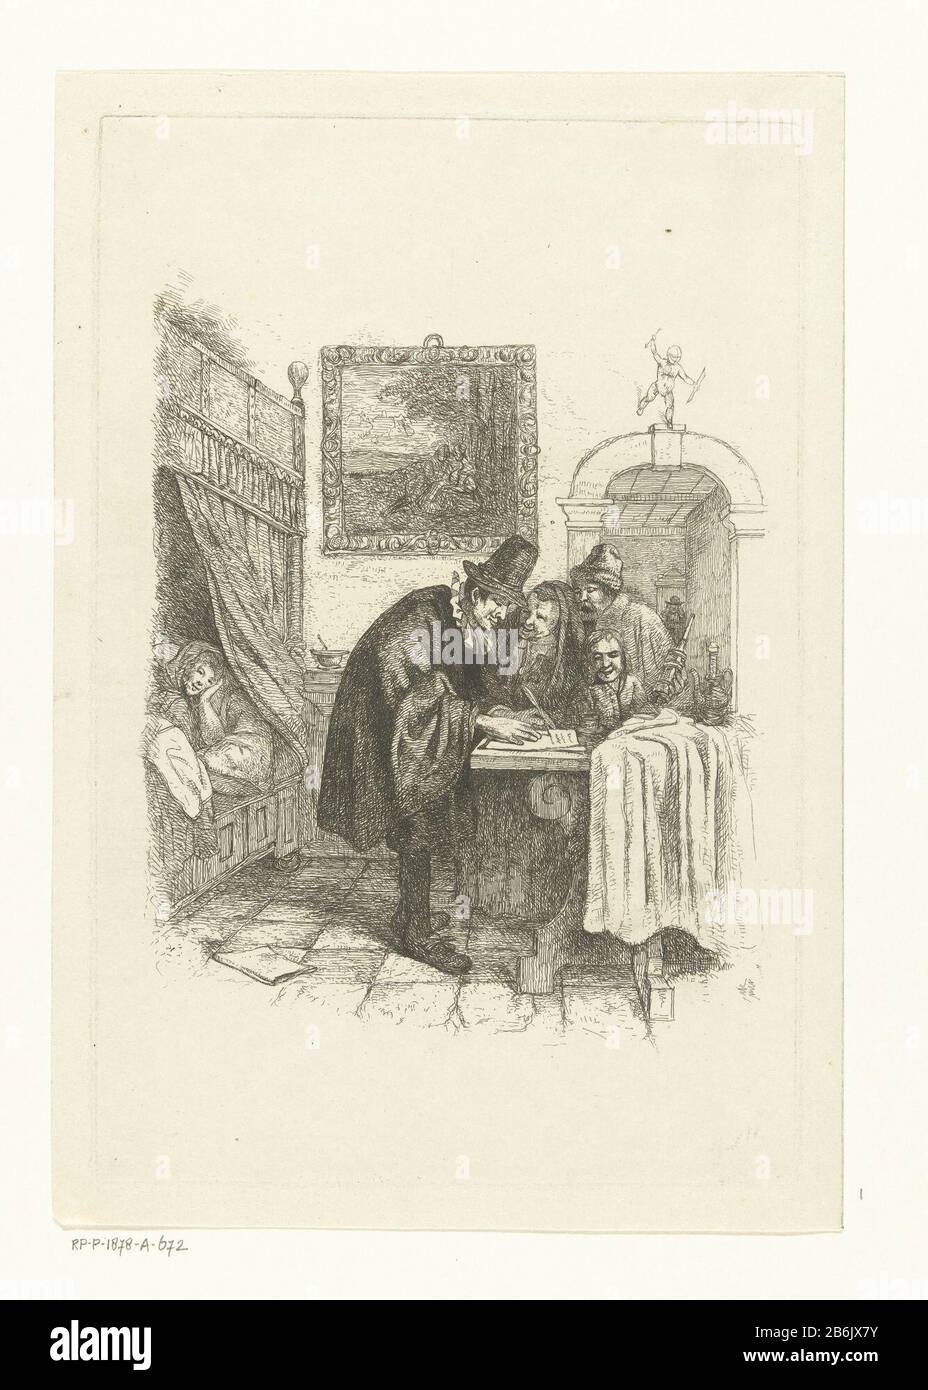 Doctor house calls to sick woman a doctor writes a prescription standing on a table. An old woman, a man with an enema and a boy watch. The patient, a sick woman lying in bed. In the interior there is a painting on the wall with a pastoral scene. On top of the arch is a small statue of Amor. Manufacturer : printmaker Albertus Brondgeestnaar painting by Jan Havicksz. Steenplaats manufacture: Netherlands Date: 1796 - 1849 Physical features: etching material: paper Technique: etching Dimensions: plate edge: H 249 mm × W 164 mmToelichtingPrent to painting by Jan Steen. Subject: sick bedphysician, Stock Photo